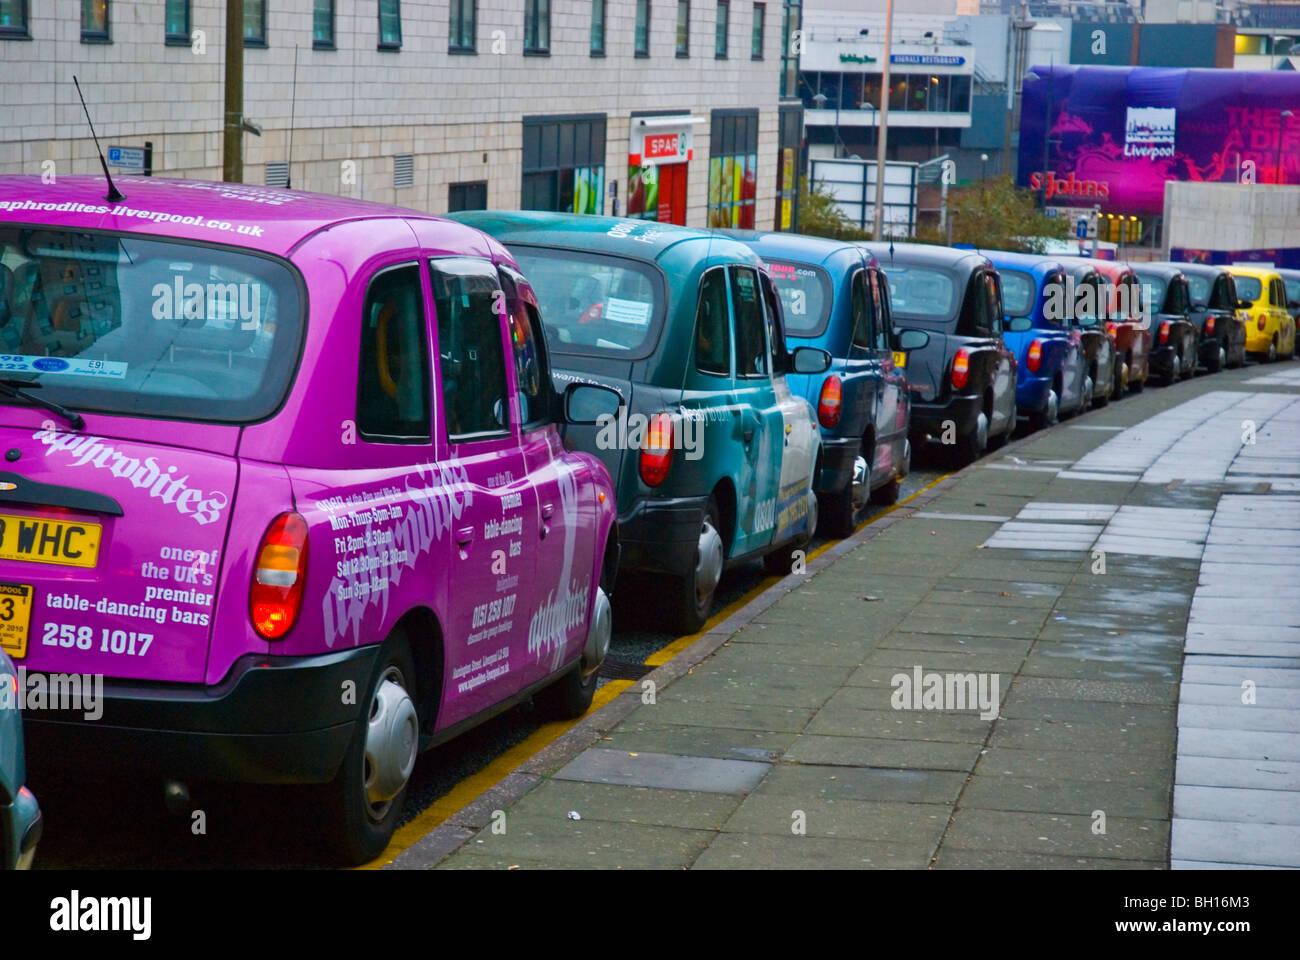 Taxis waiting outside Lime Street station in central Liverpool England UK Europe Stock Photo